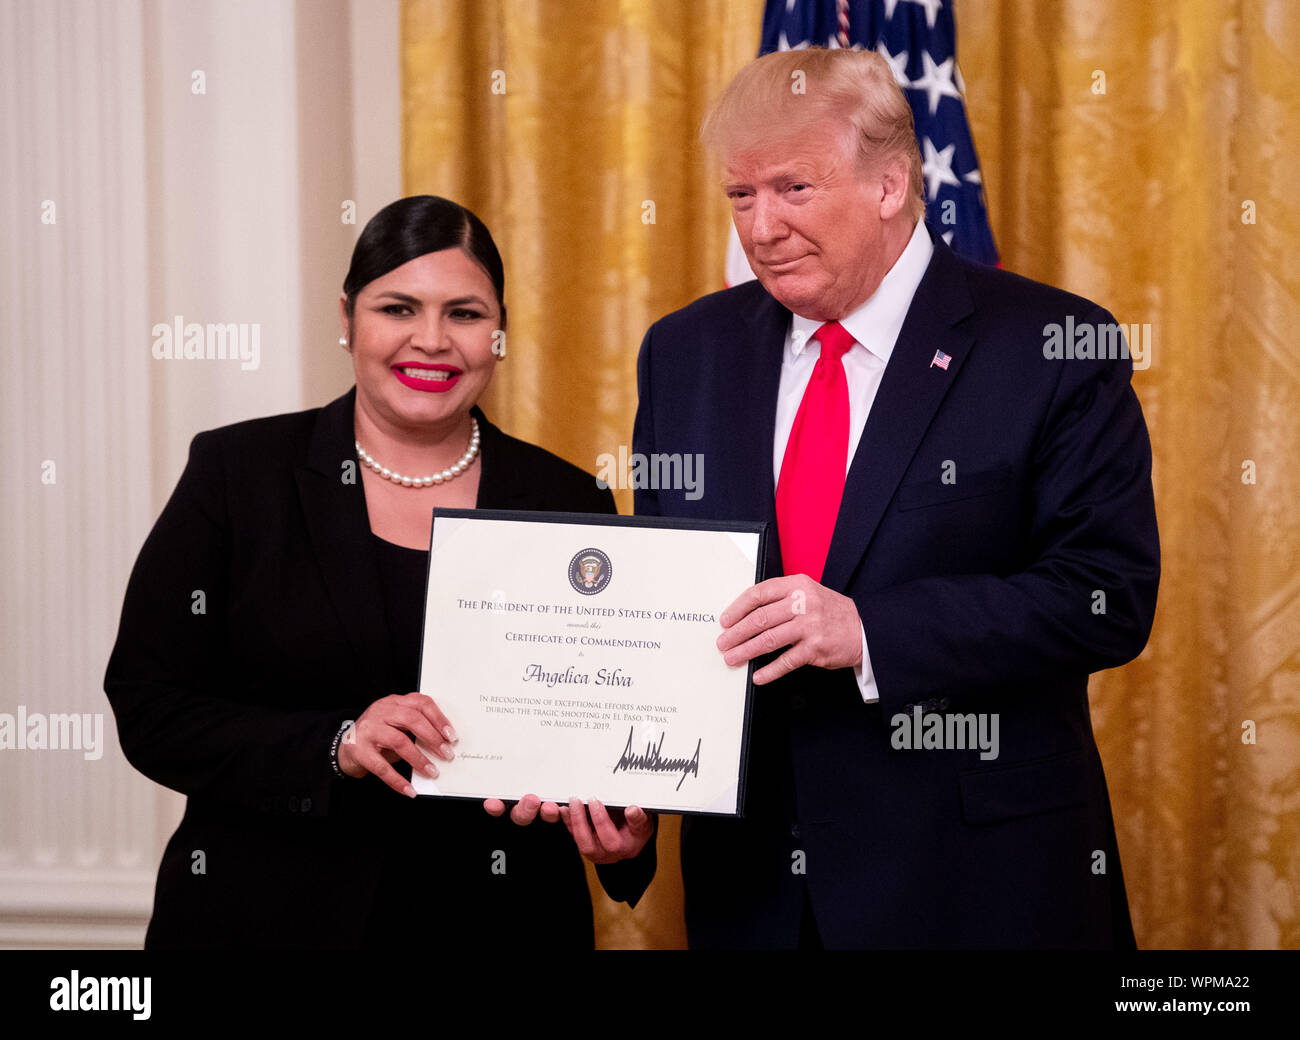 Washington, United States. 09th Sep, 2019. President Donald Trump awards a Heroic Commendations to Angelica Silva for her heroic actions during a mass shooting, during a ceremony in the East Room at the White House in Washington, DC on Monday, September 9, 2019. Trump recognized the six Dayton officers who stoped a mass shooting on August 4th and honored 5 civilians who helped during a mass shooting at a Walmart in El Paso a day before. Photo by Kevin Dietsch/UPI Credit: UPI/Alamy Live News Stock Photo